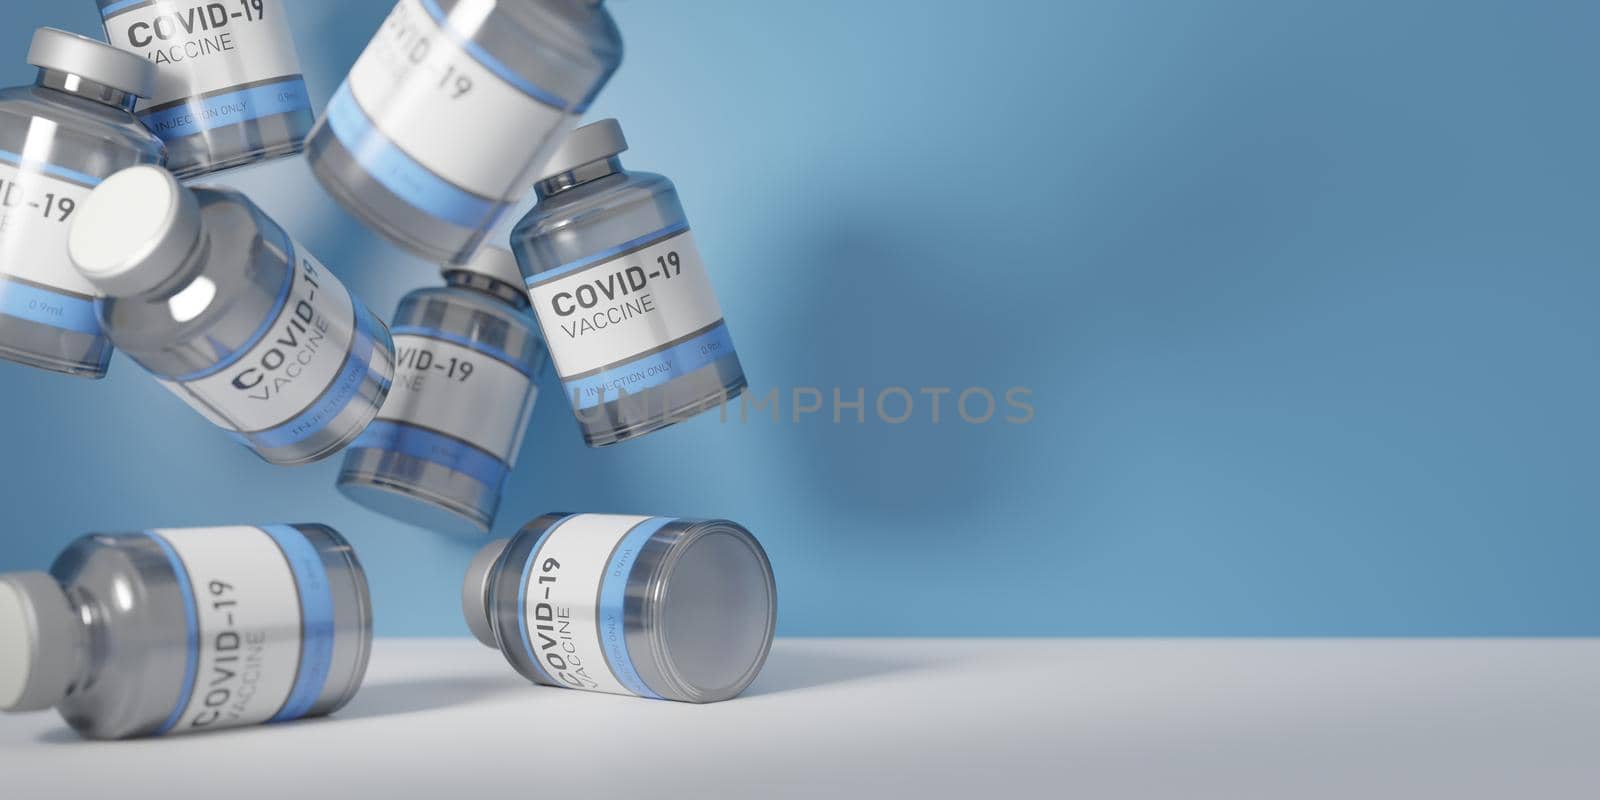 CORONAVIRUS VACCINE CANS FALLING ON WHITE TABLE by asolano